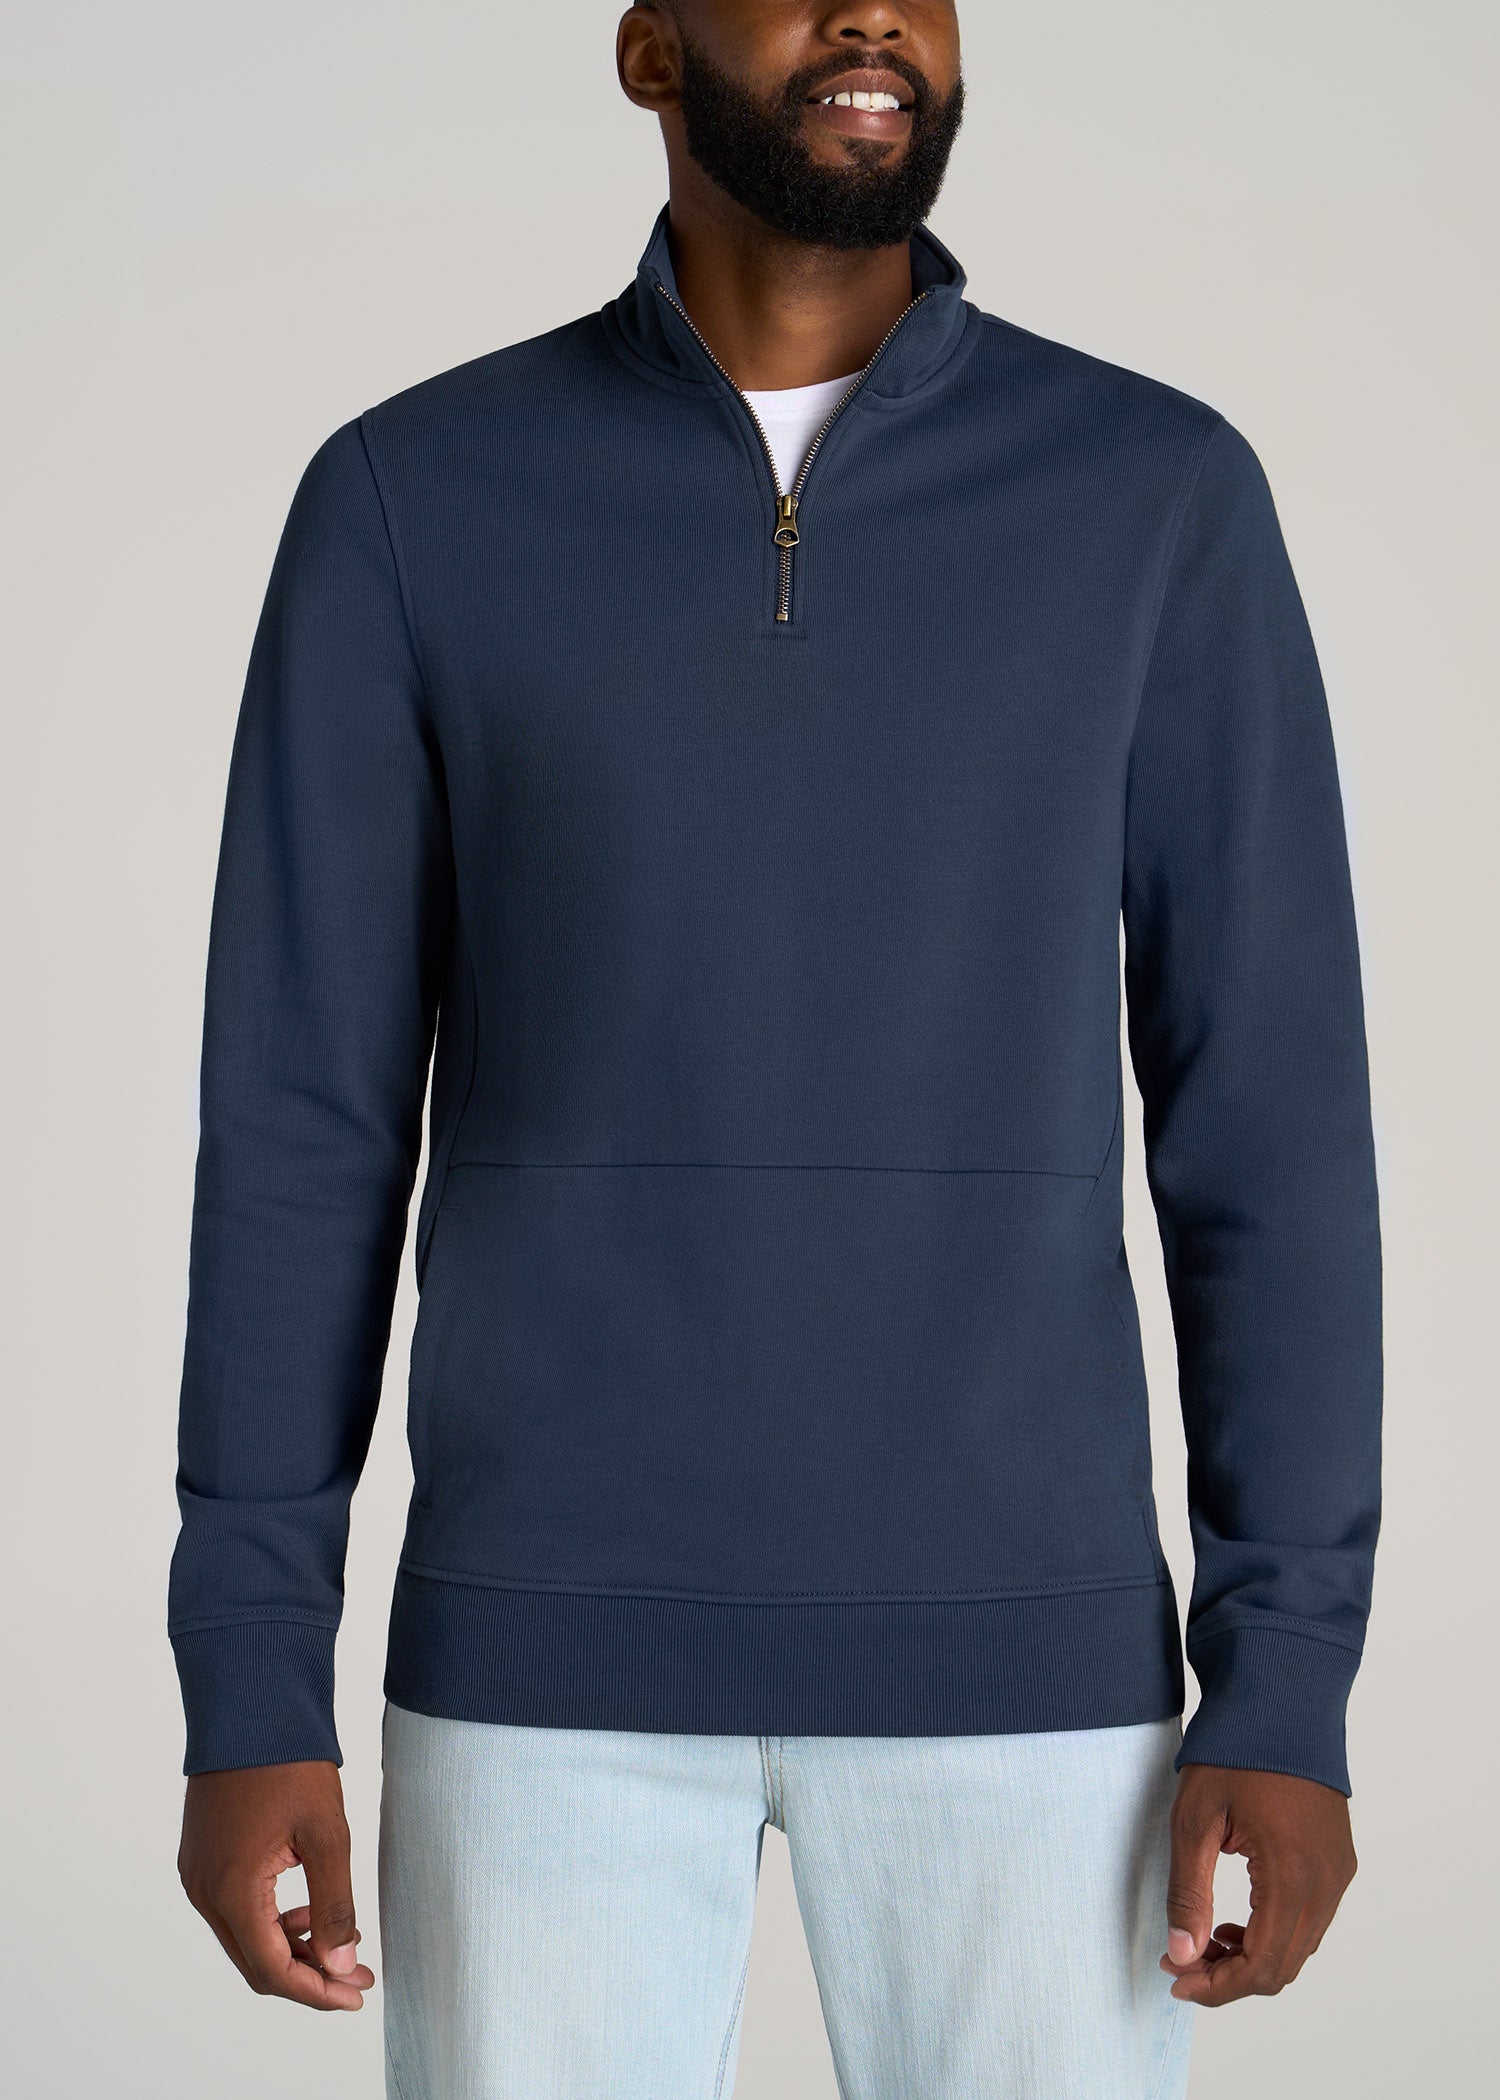 LJ&S Mens Tall French Terry Zip Pullover Vintage Navy – American Tall